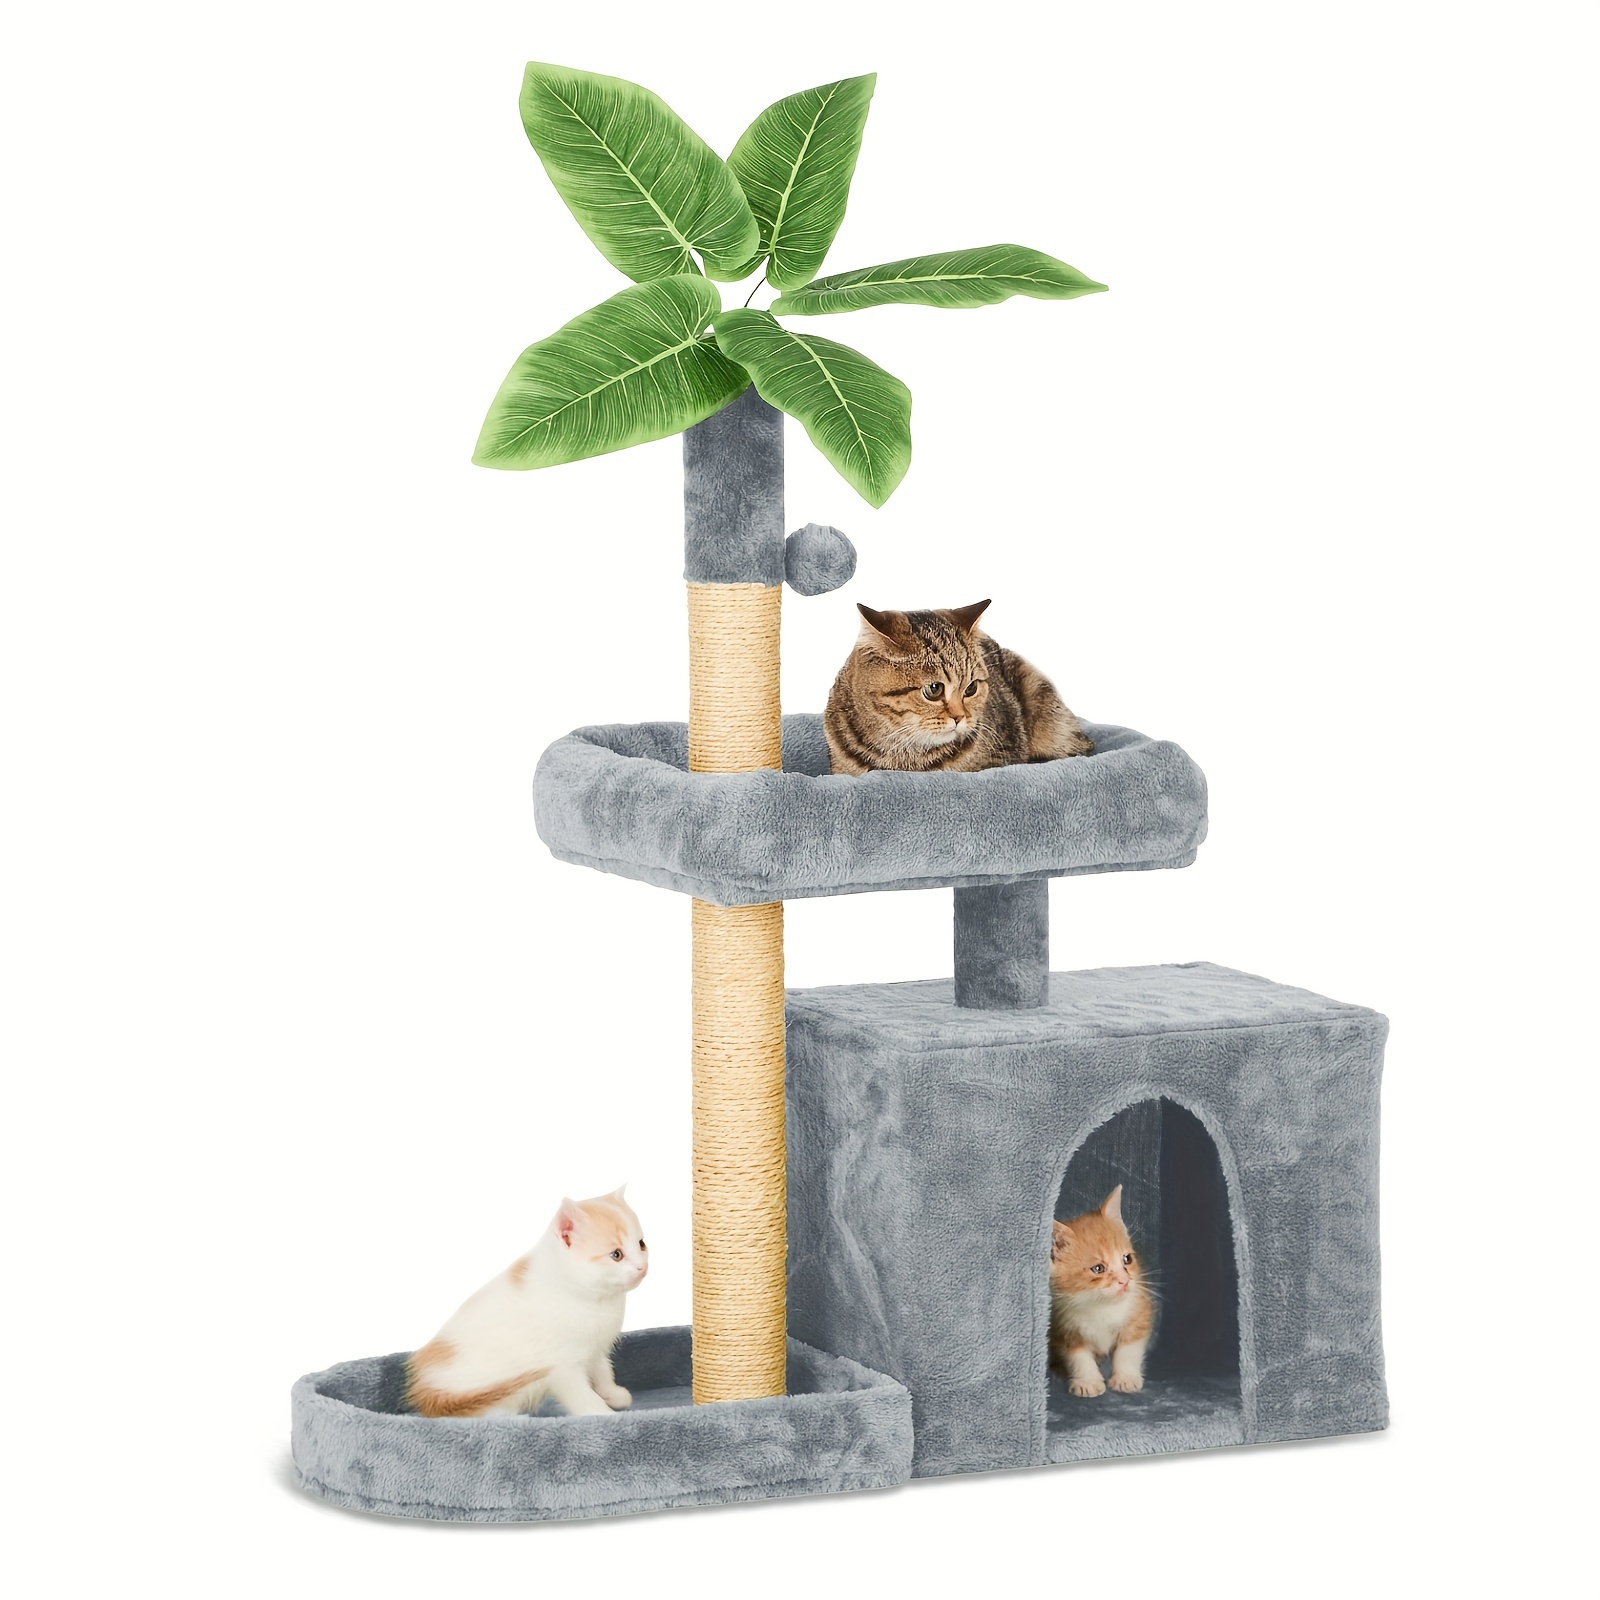 

Tscomon 31.5" Cat Tree Cat Tower For Indoor Cats With Green Leaves, Cat Condo Cozy Plush Cat House With Hang Ball, Pink